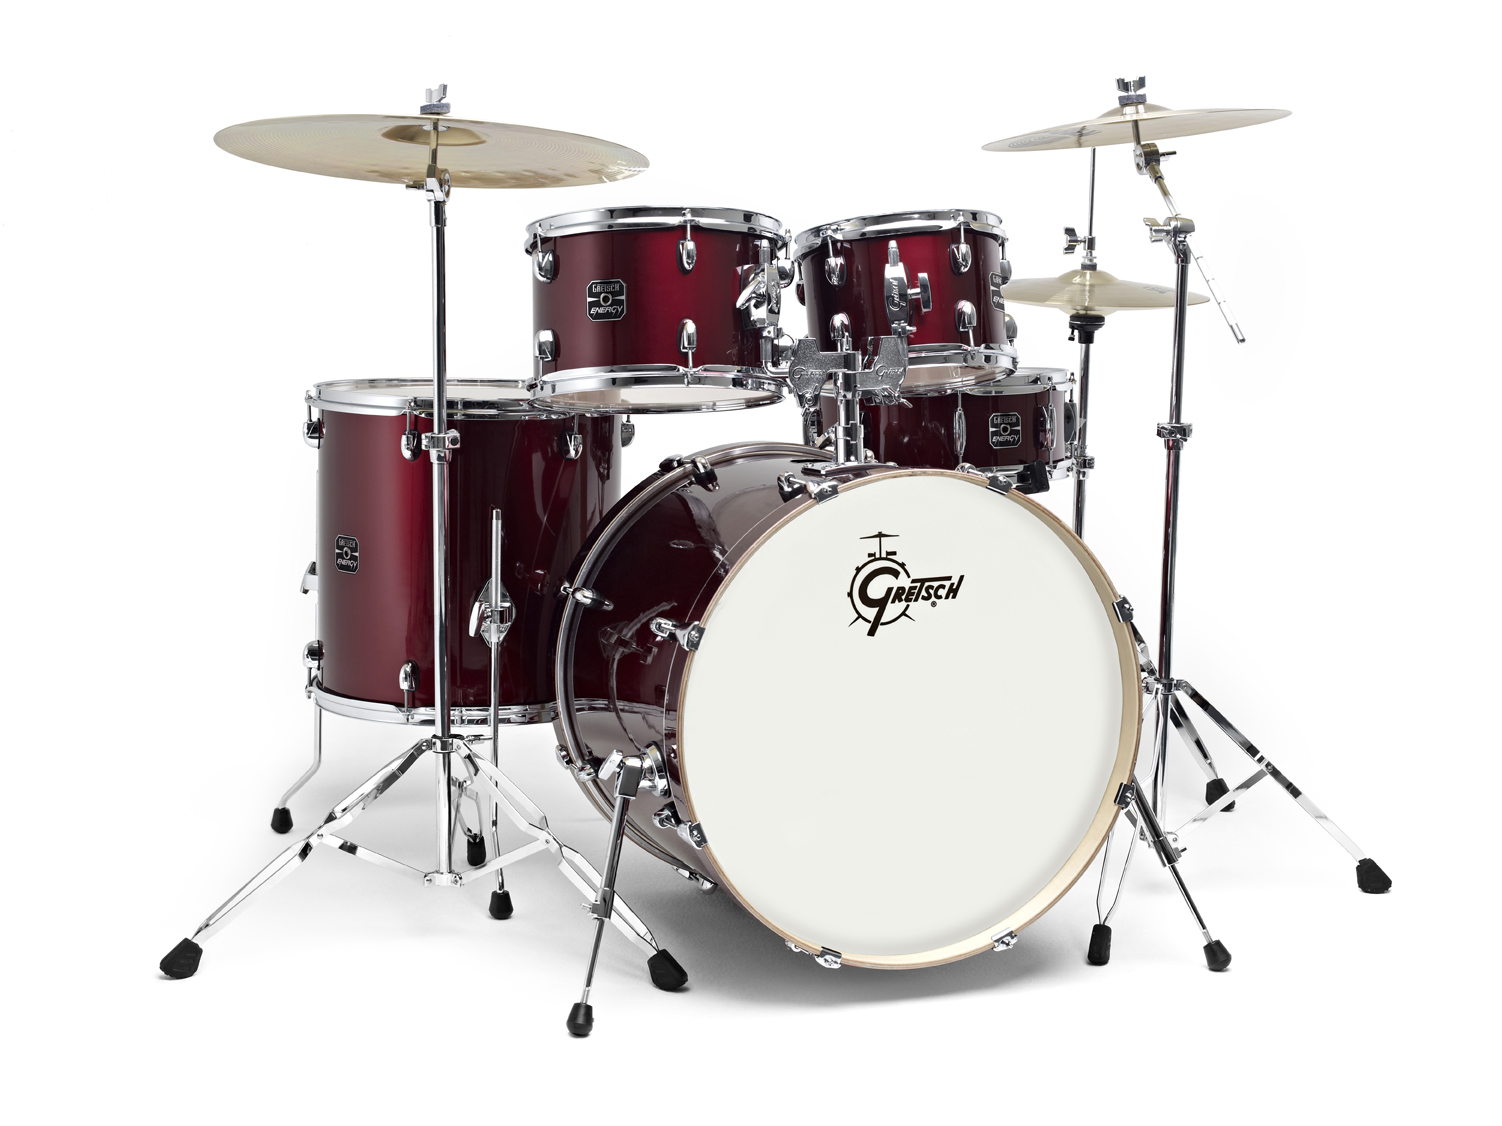 GRETSCH DRUMS NEW ENERGY STAGE 22 WINE RED+ CYMBALES SABIAN SBR